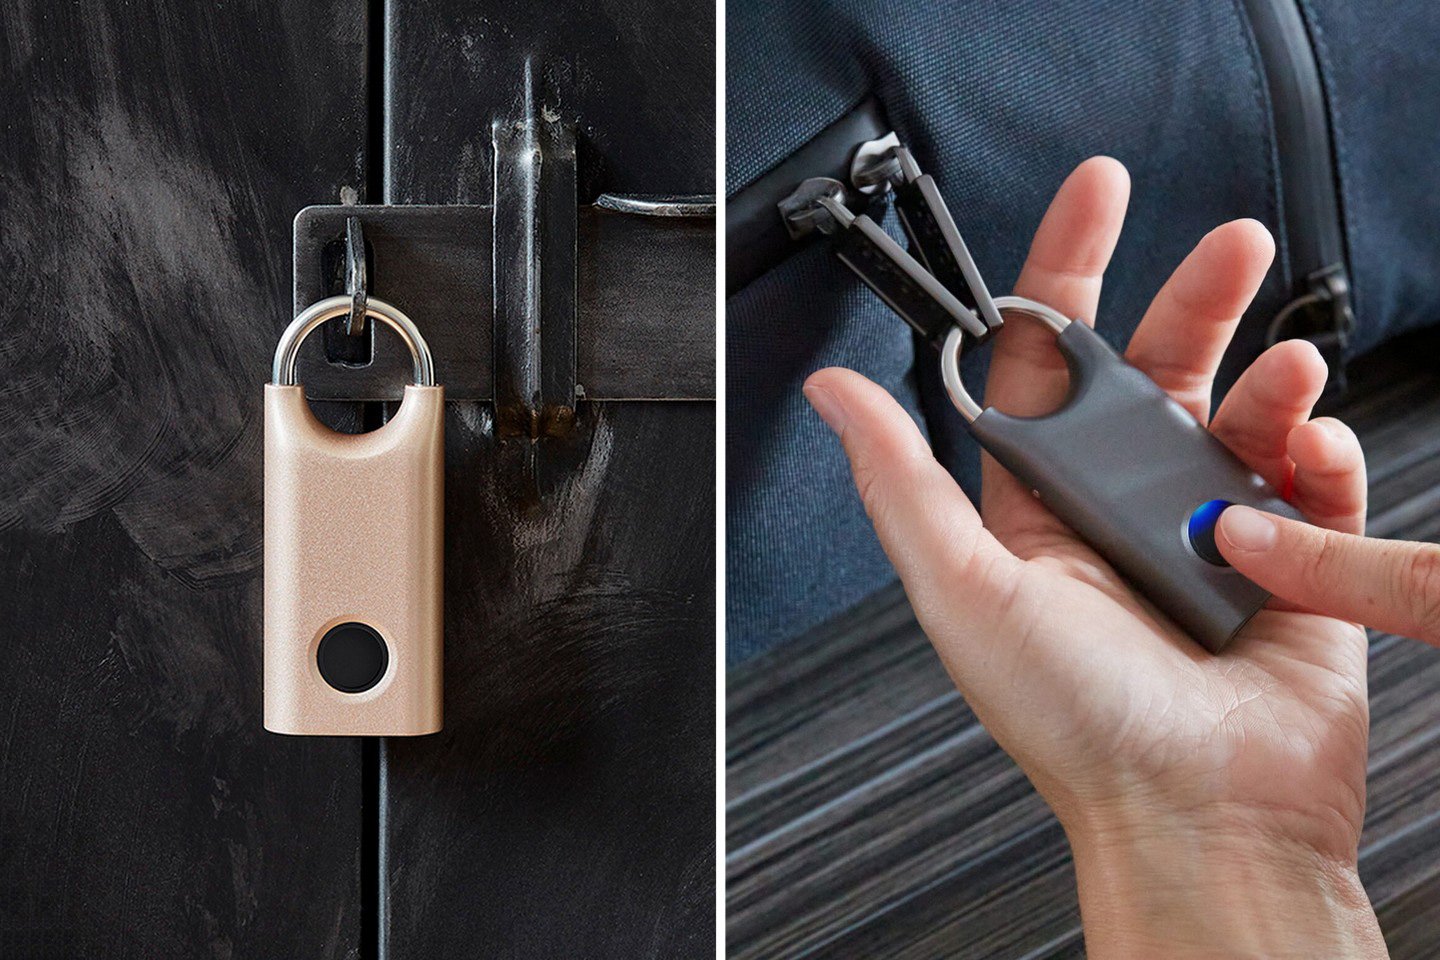 #Tiny biometric lock lets you secure everything from your gym bag to locker with a fingerprint